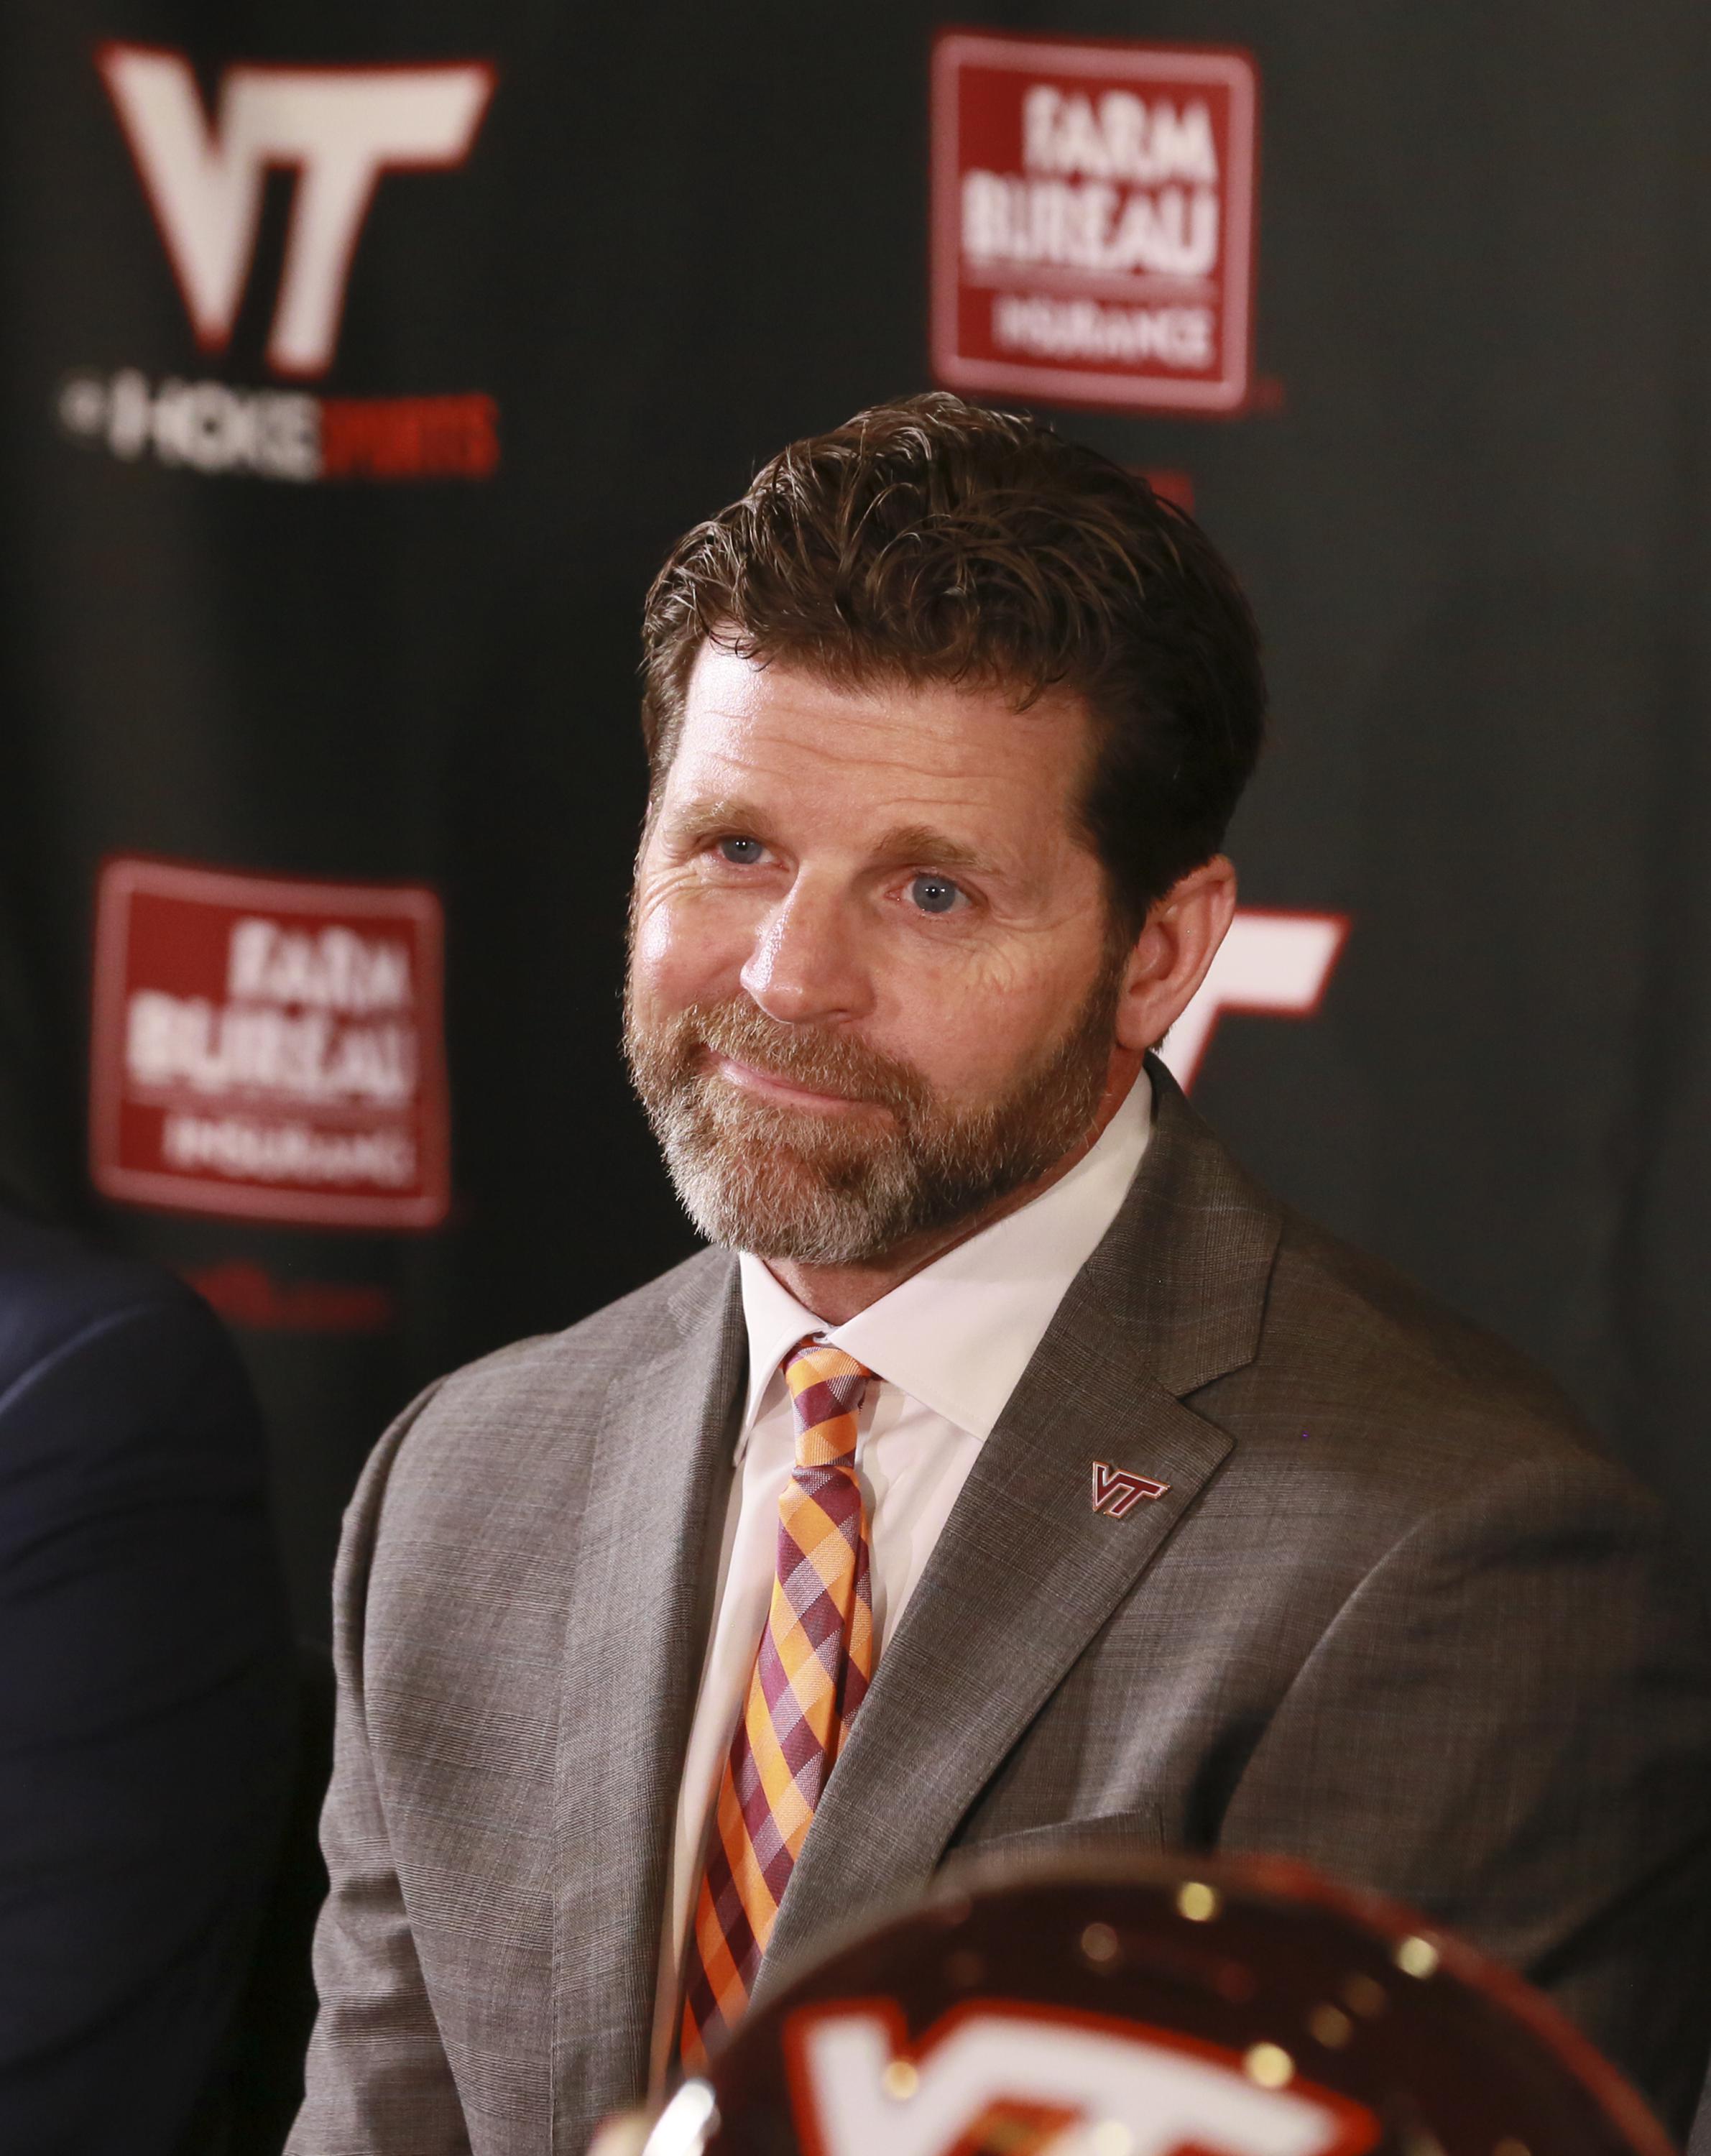 Pry: 'Honored, humbled' to be Virginia Tech football coach | AP News